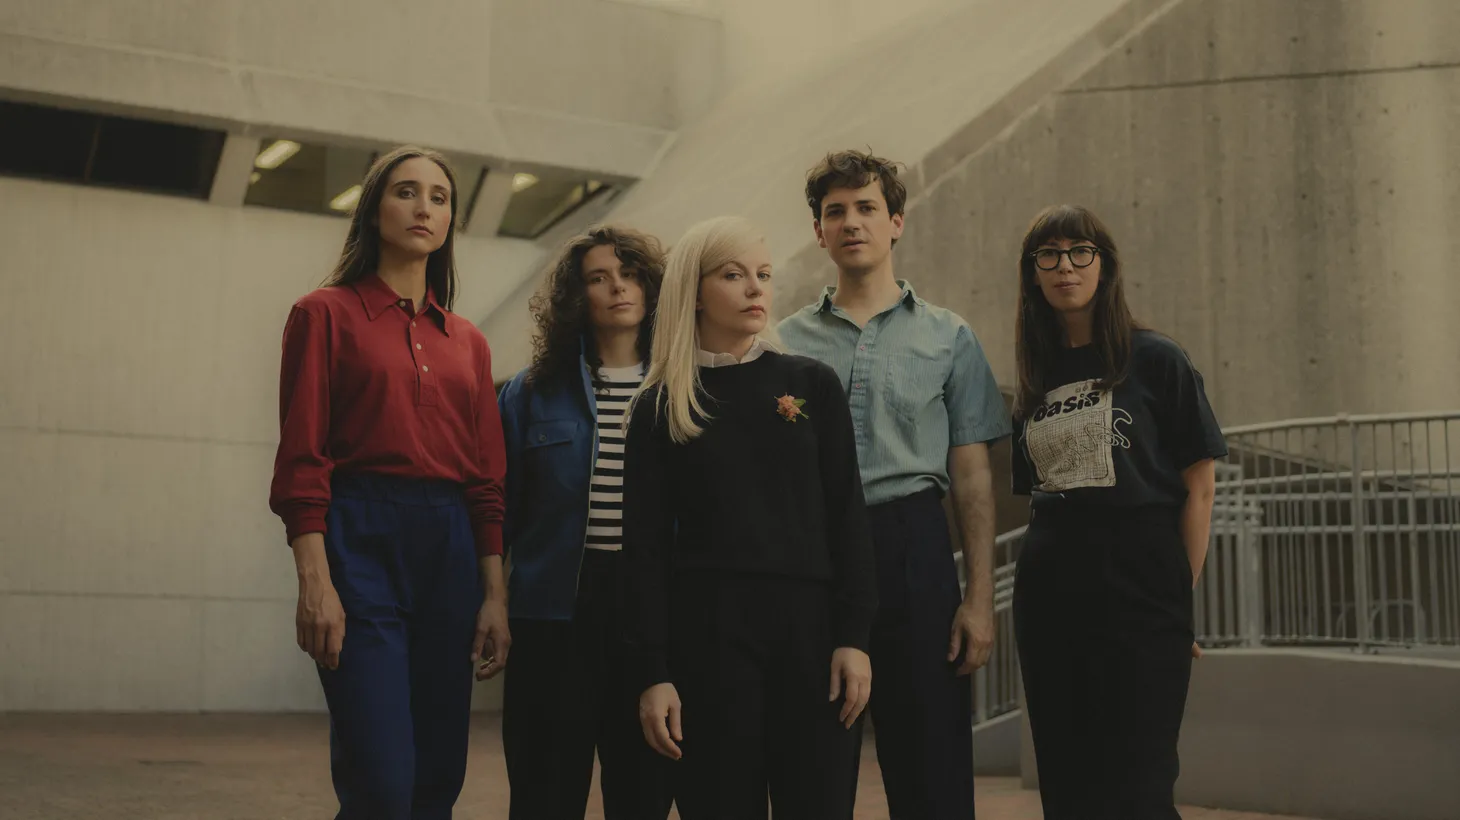 Decades later, Toronto’s Alvvays responds to Belinda Carlisle’s ‘80s mega-hit “Heaven Is A Place On Earth” with “Belinda Says,” an homage to the girls wiping tables, off of their newly-minted, bold and beautiful album “Blue Rev.”